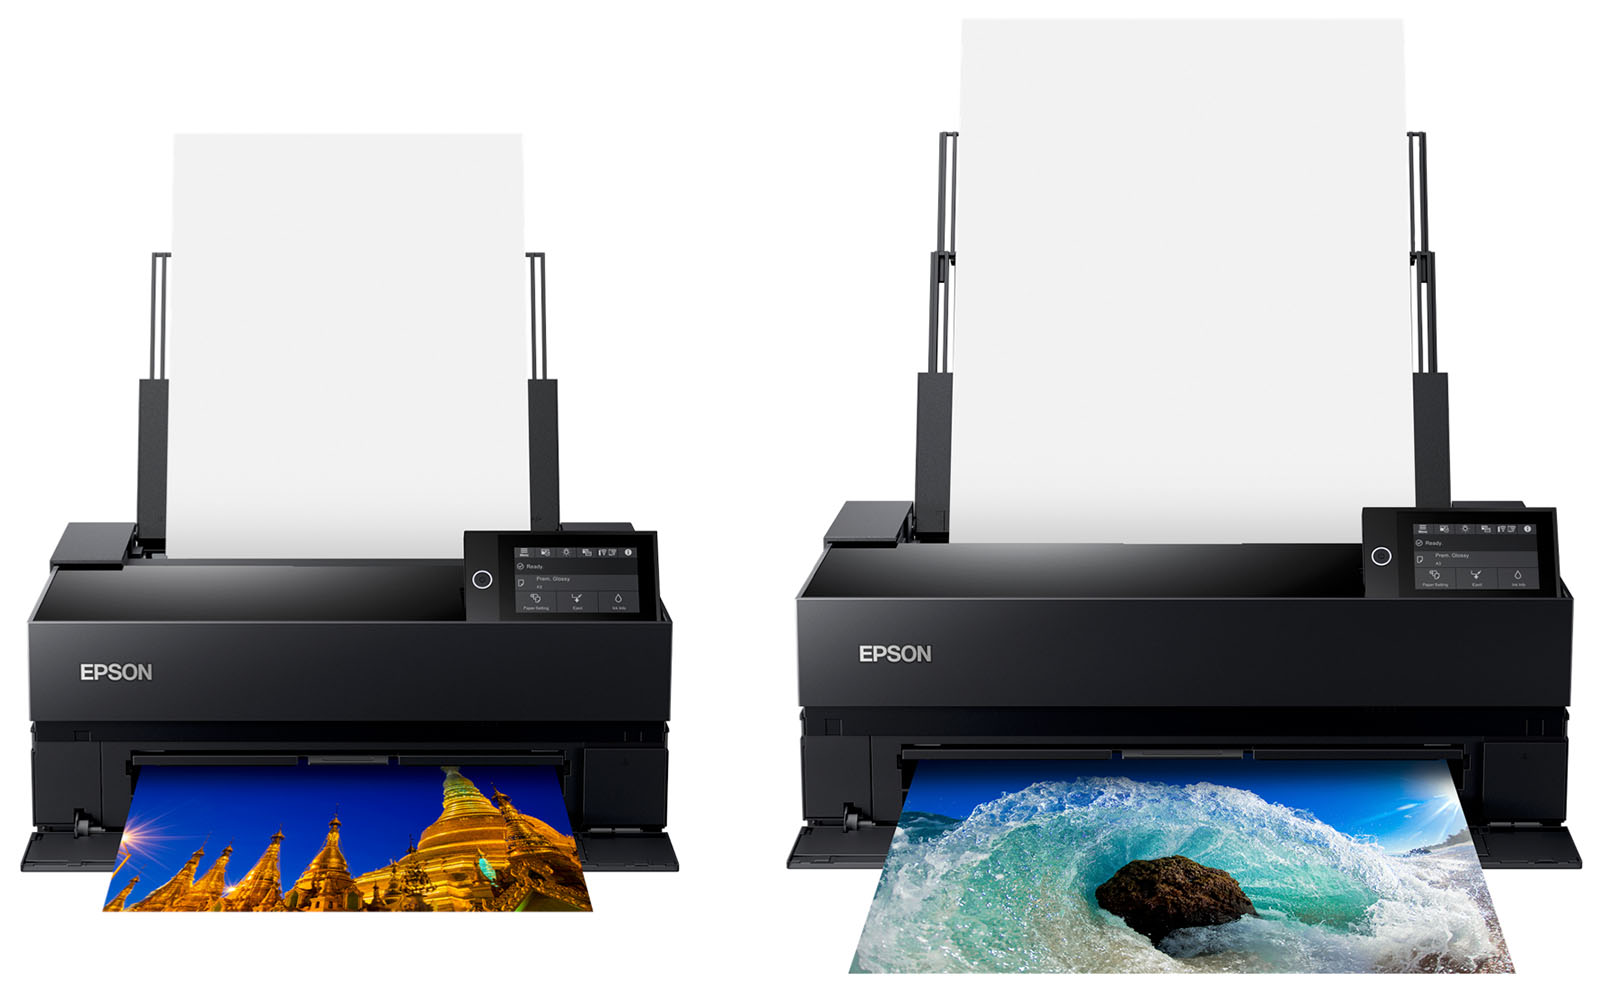 Epson Introduces SureColor P700 and P900 Photo Printers